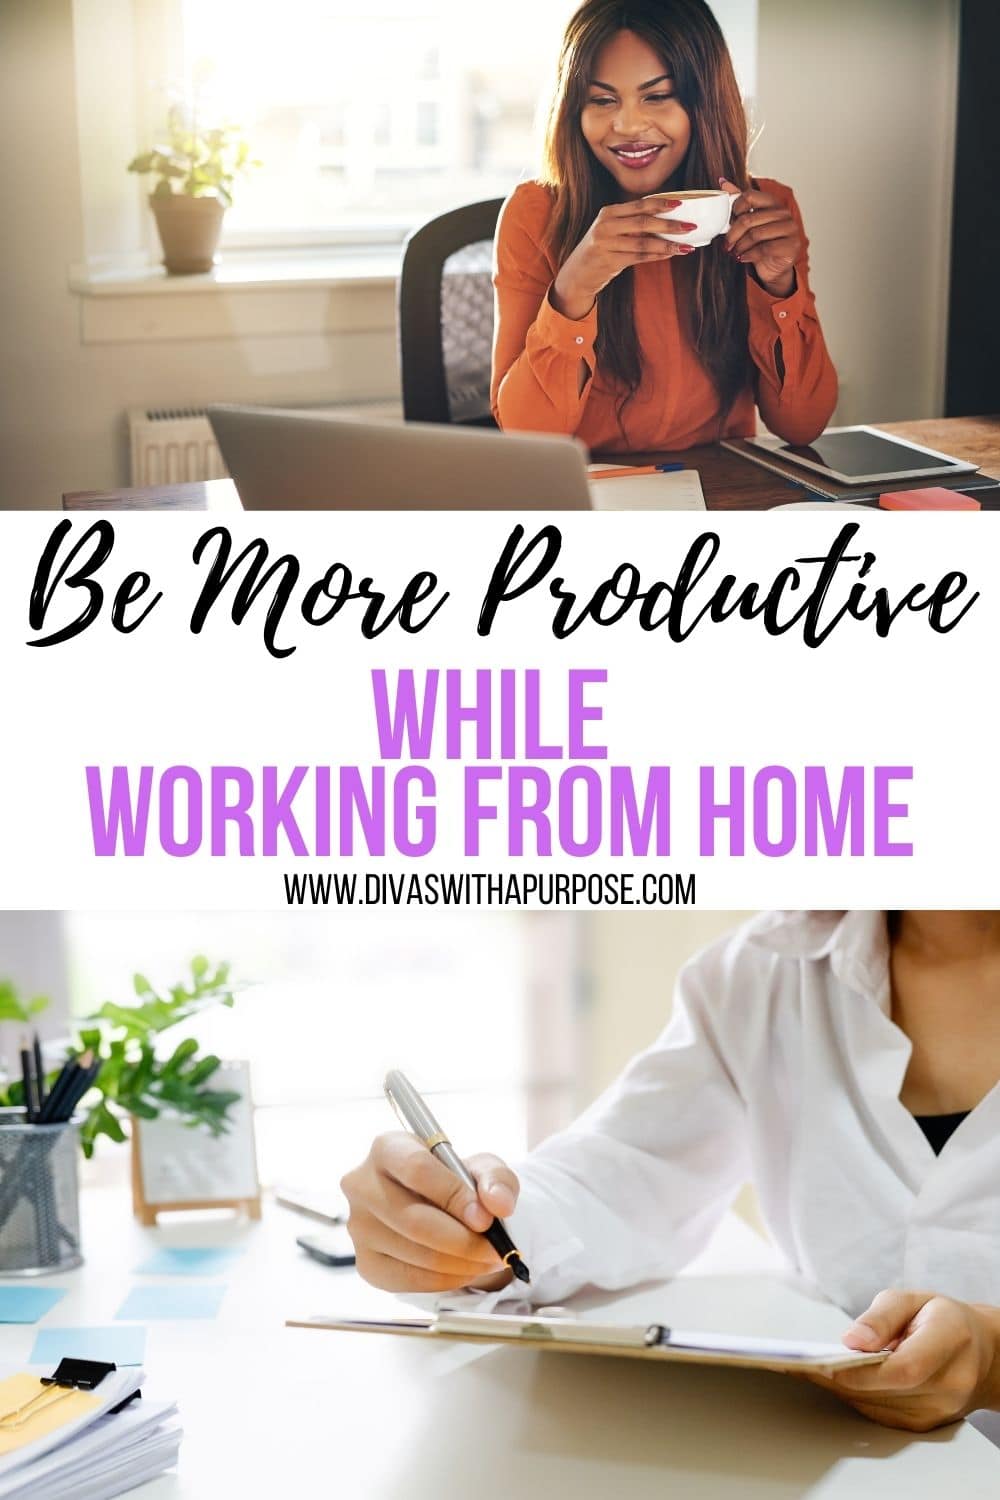 Are you wondering how to be more productive while working from home? It may seem impossible, but where there's a will there's a way. This article includes some tips to focus more on what you can do with the time you have available. #productivity #homebusiness